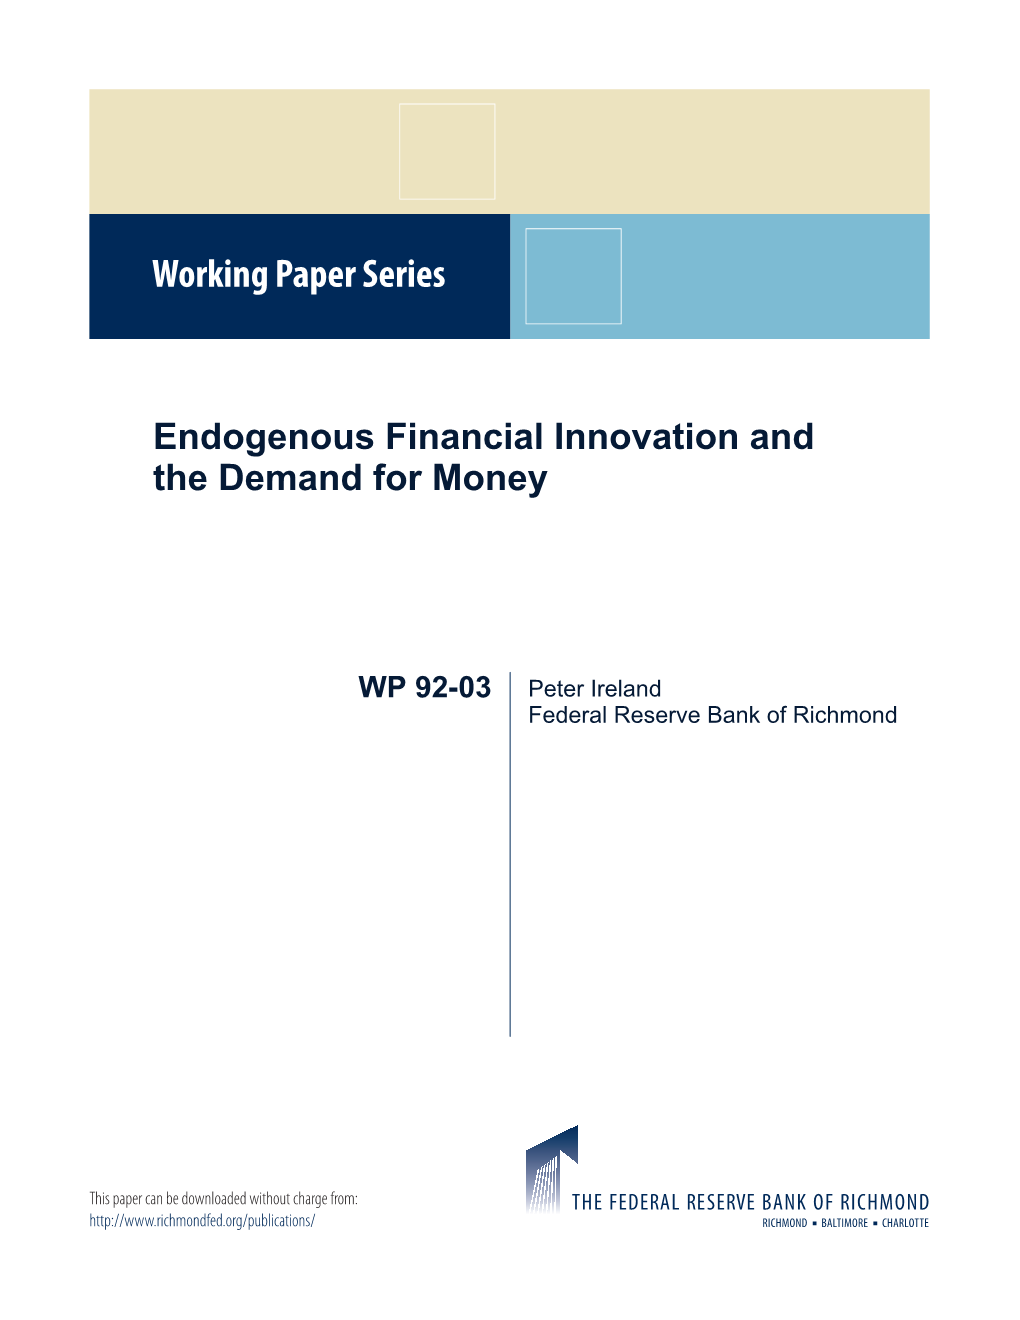 Endogenous Financial Innovation and the Demand for Money